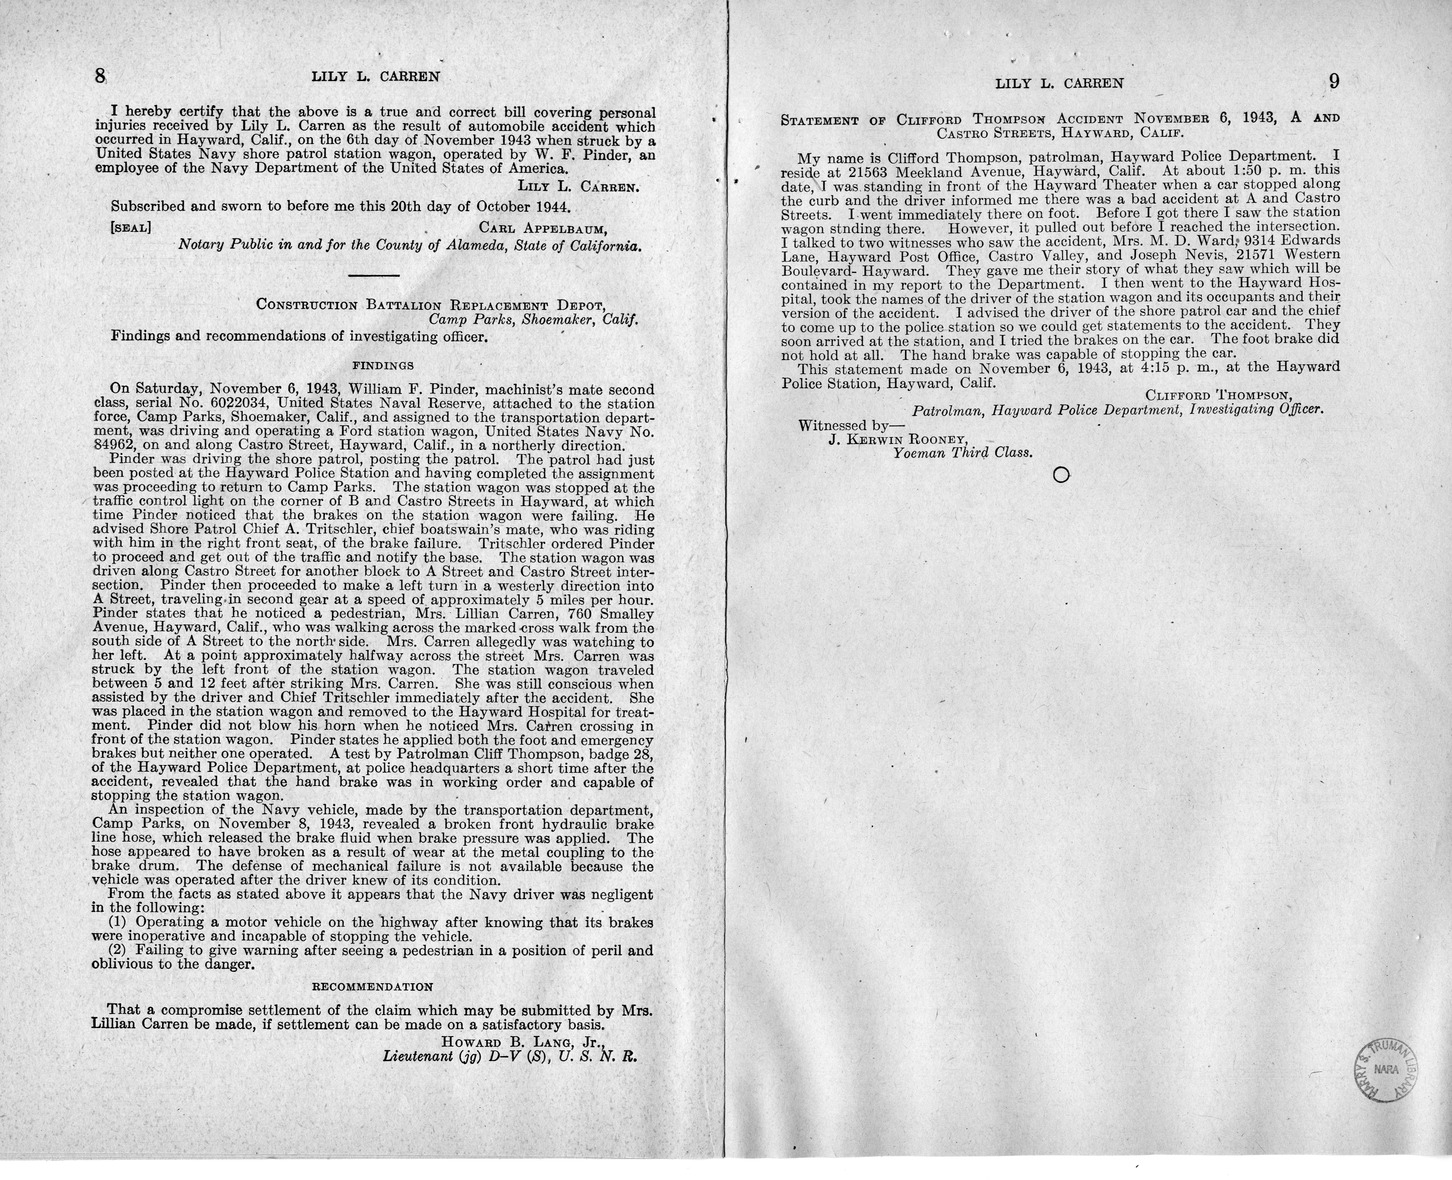 Memorandum from Frederick J. Bailey to M. C. Latta, H.R. 999, For the Relief of Lily L. Carren, with Attachments